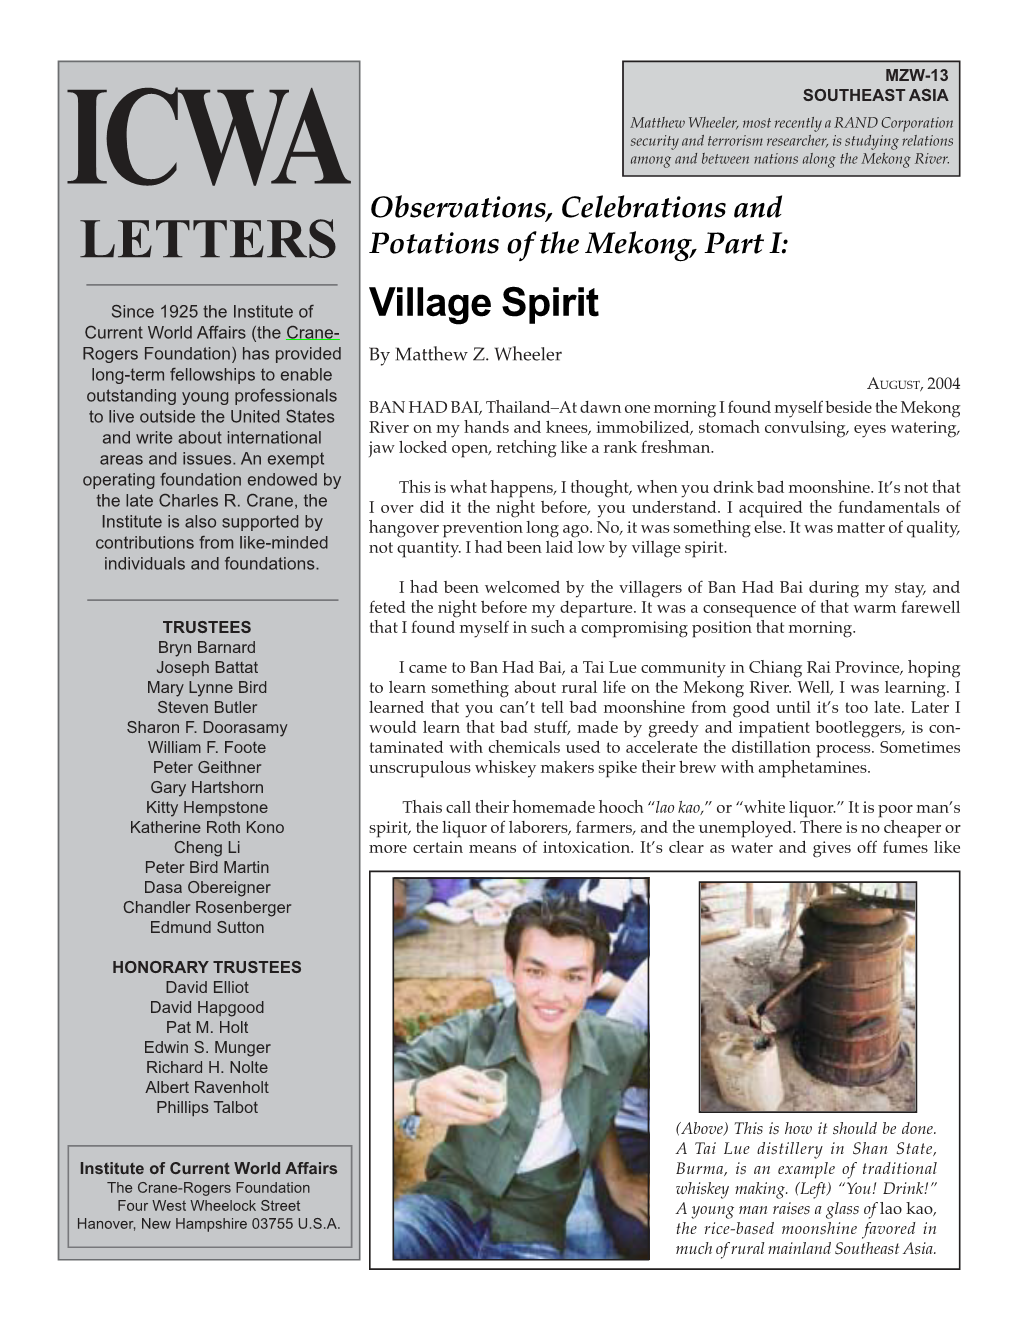 Village Spirit Current World Affairs (The Crane- Rogers Foundation) Has Provided by Matthew Z